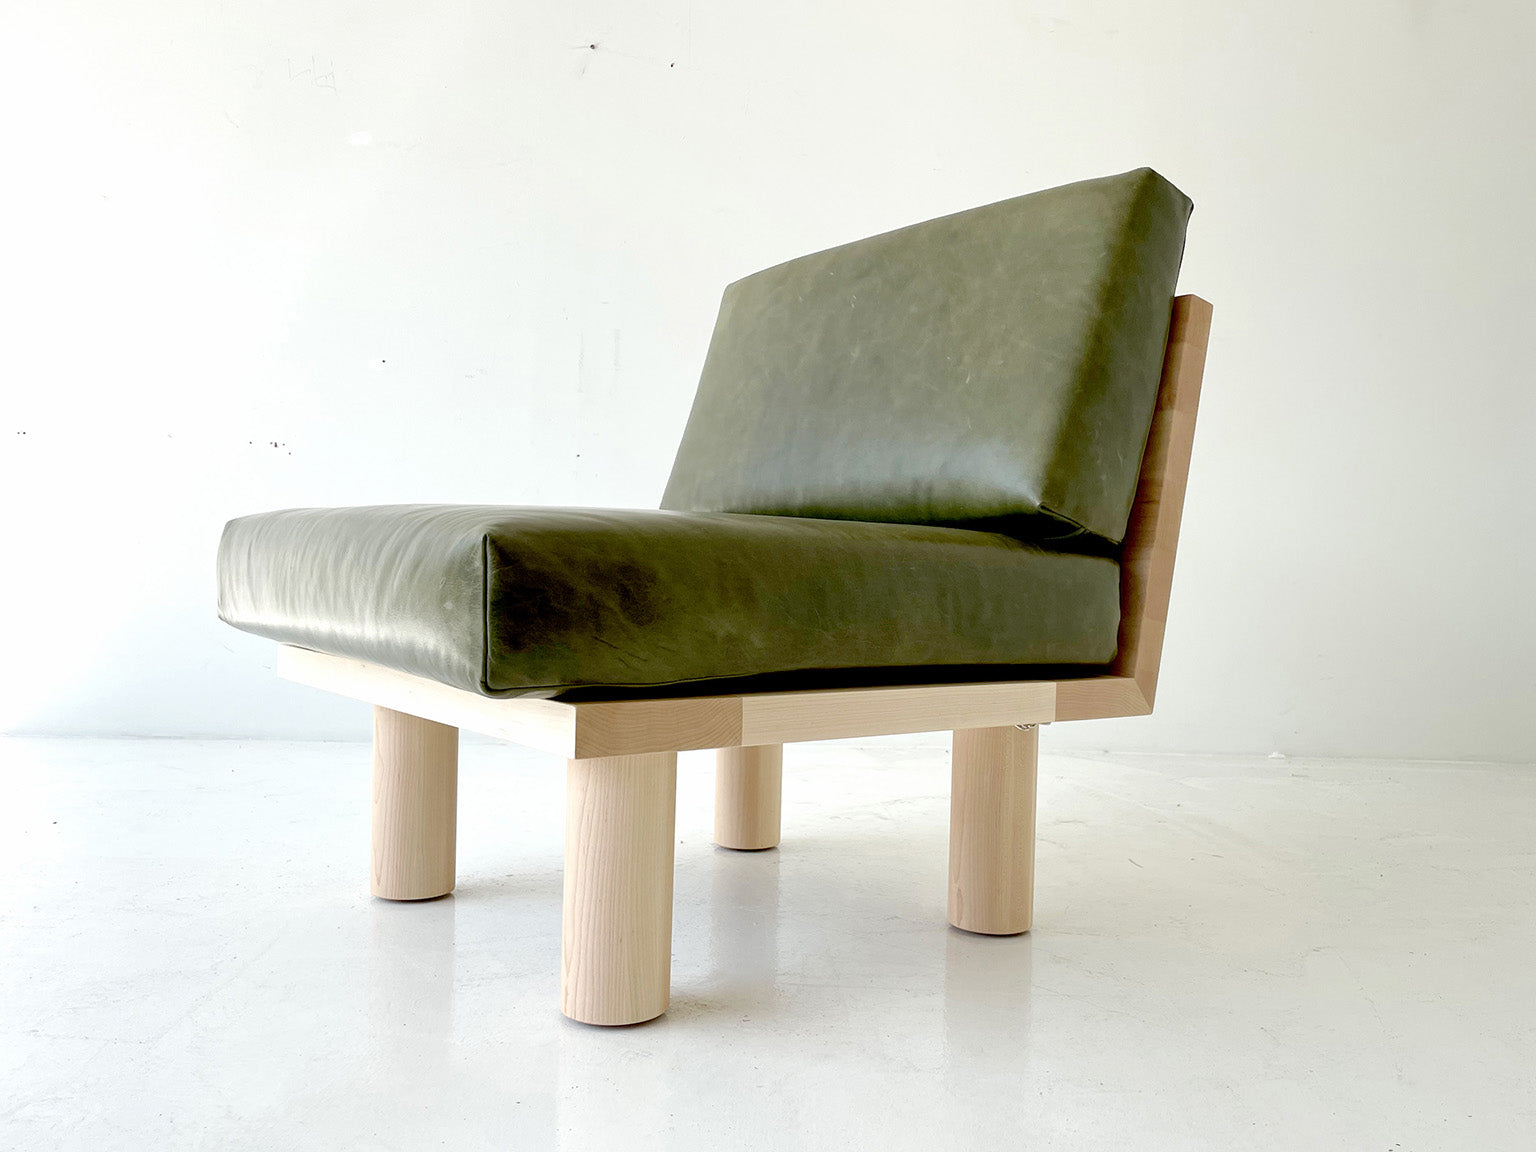  Turned Leg Suelo Side Chair In Leather And Maple - 3021, 01